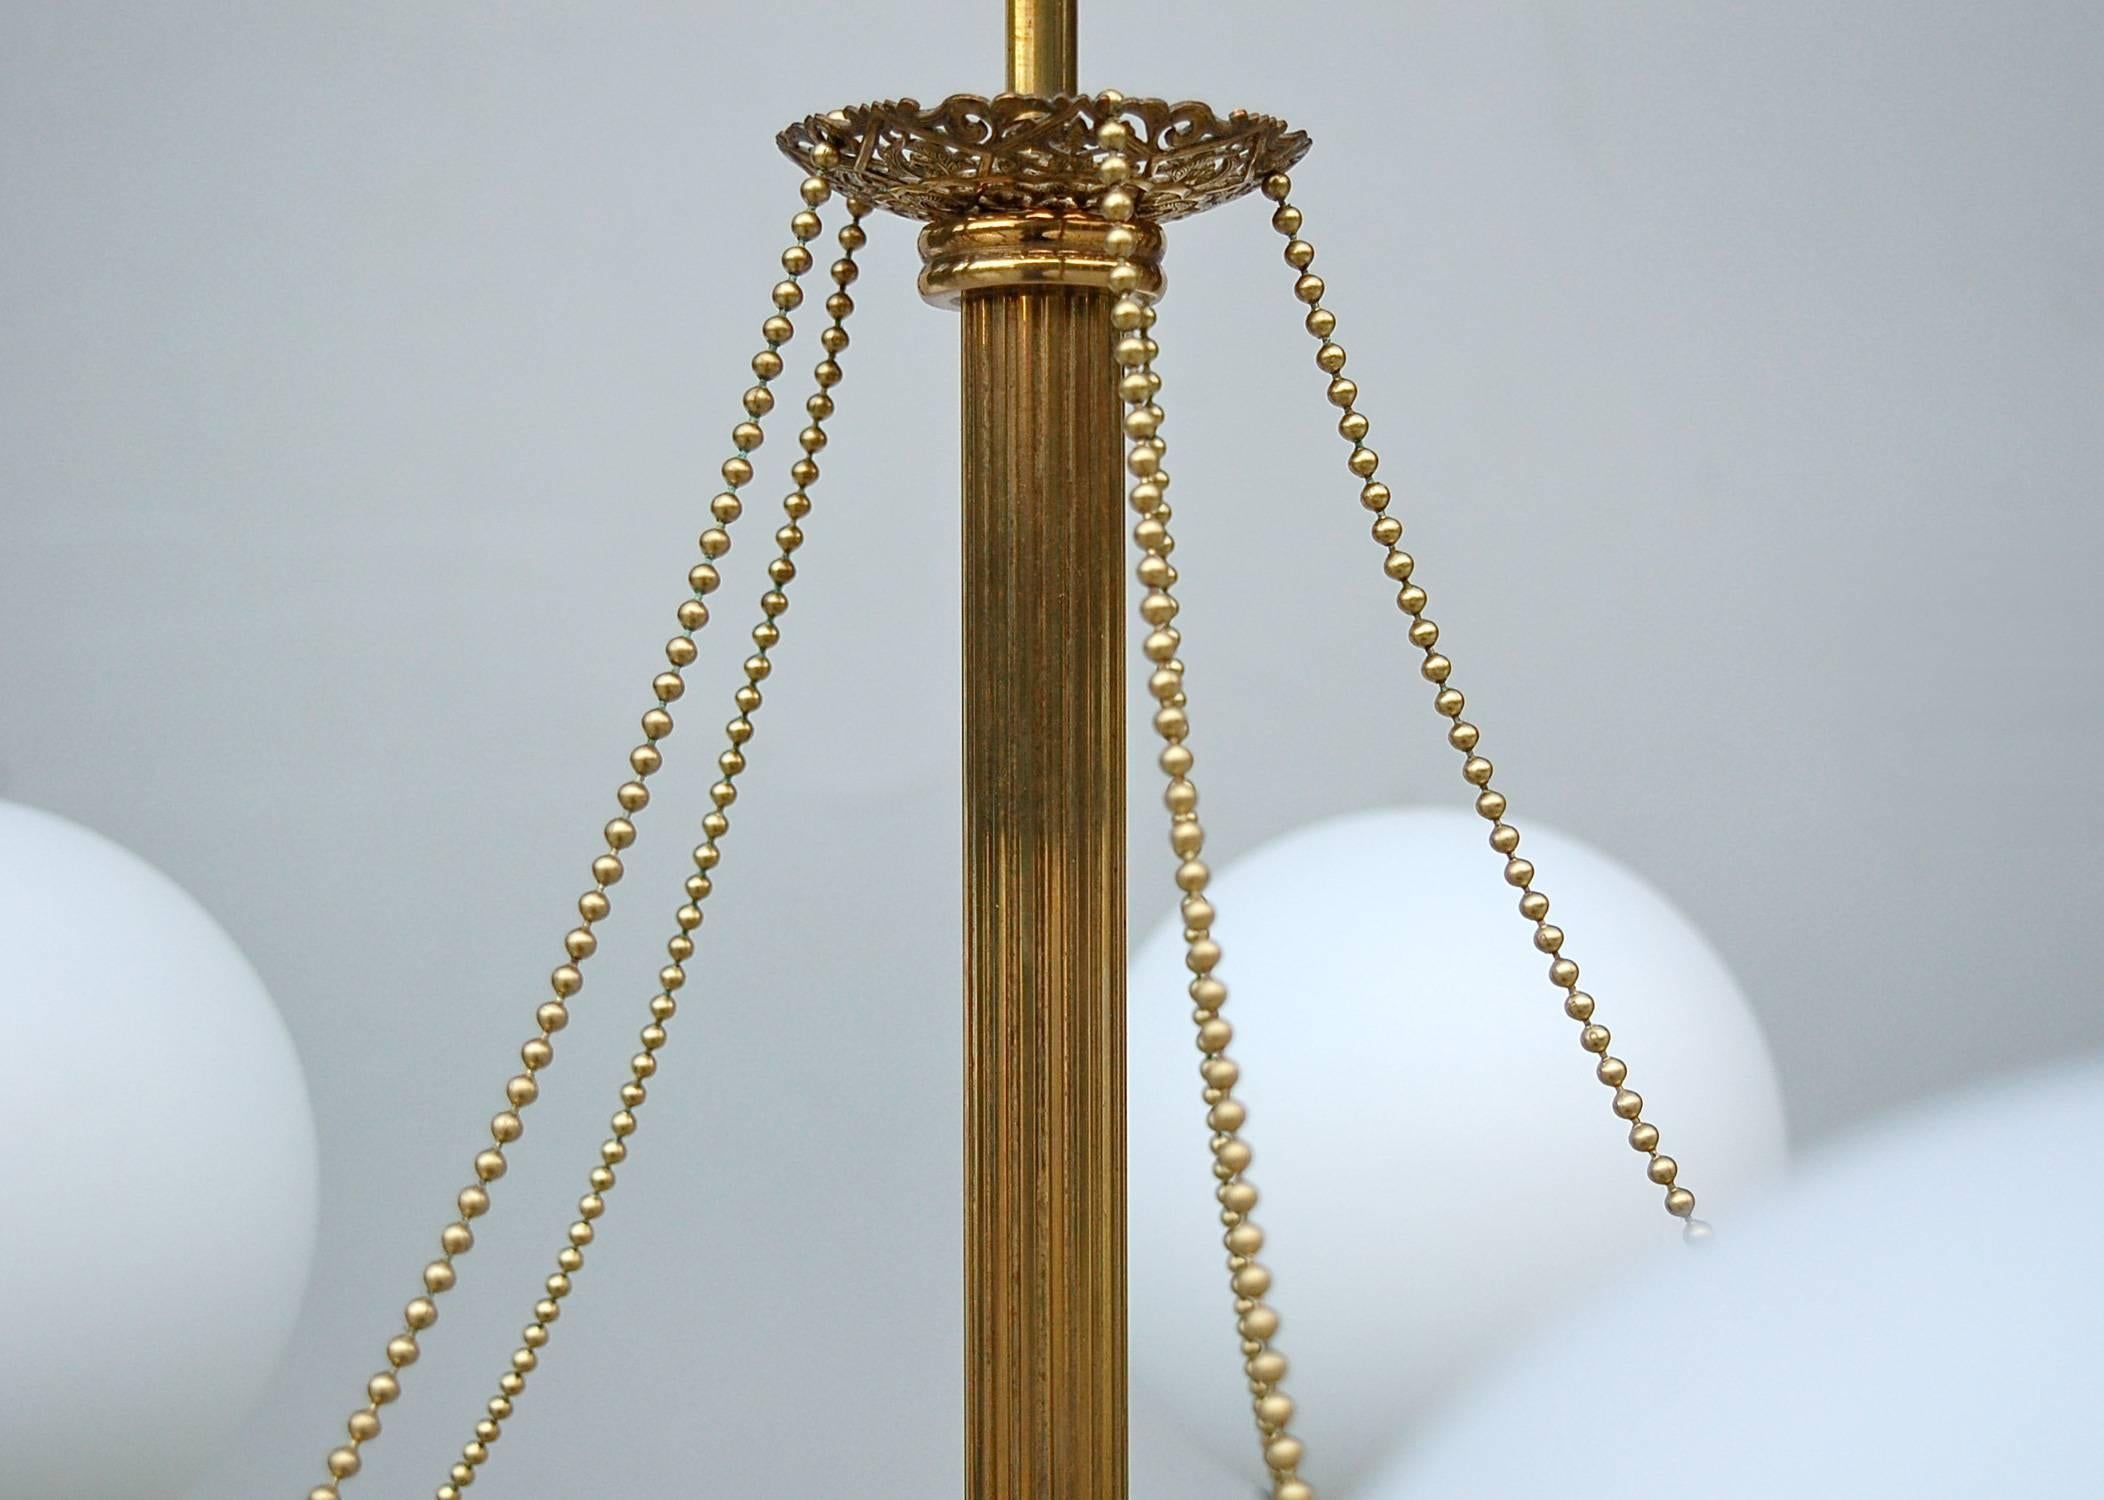 This ceiling lamp is very evocative of the early 20th century. A survivor of its time, it probably hung in a French bistro, hotel or cafe. The central fluted stem and curved arms are made from brass and are linked by delicate pearl shaped chains.